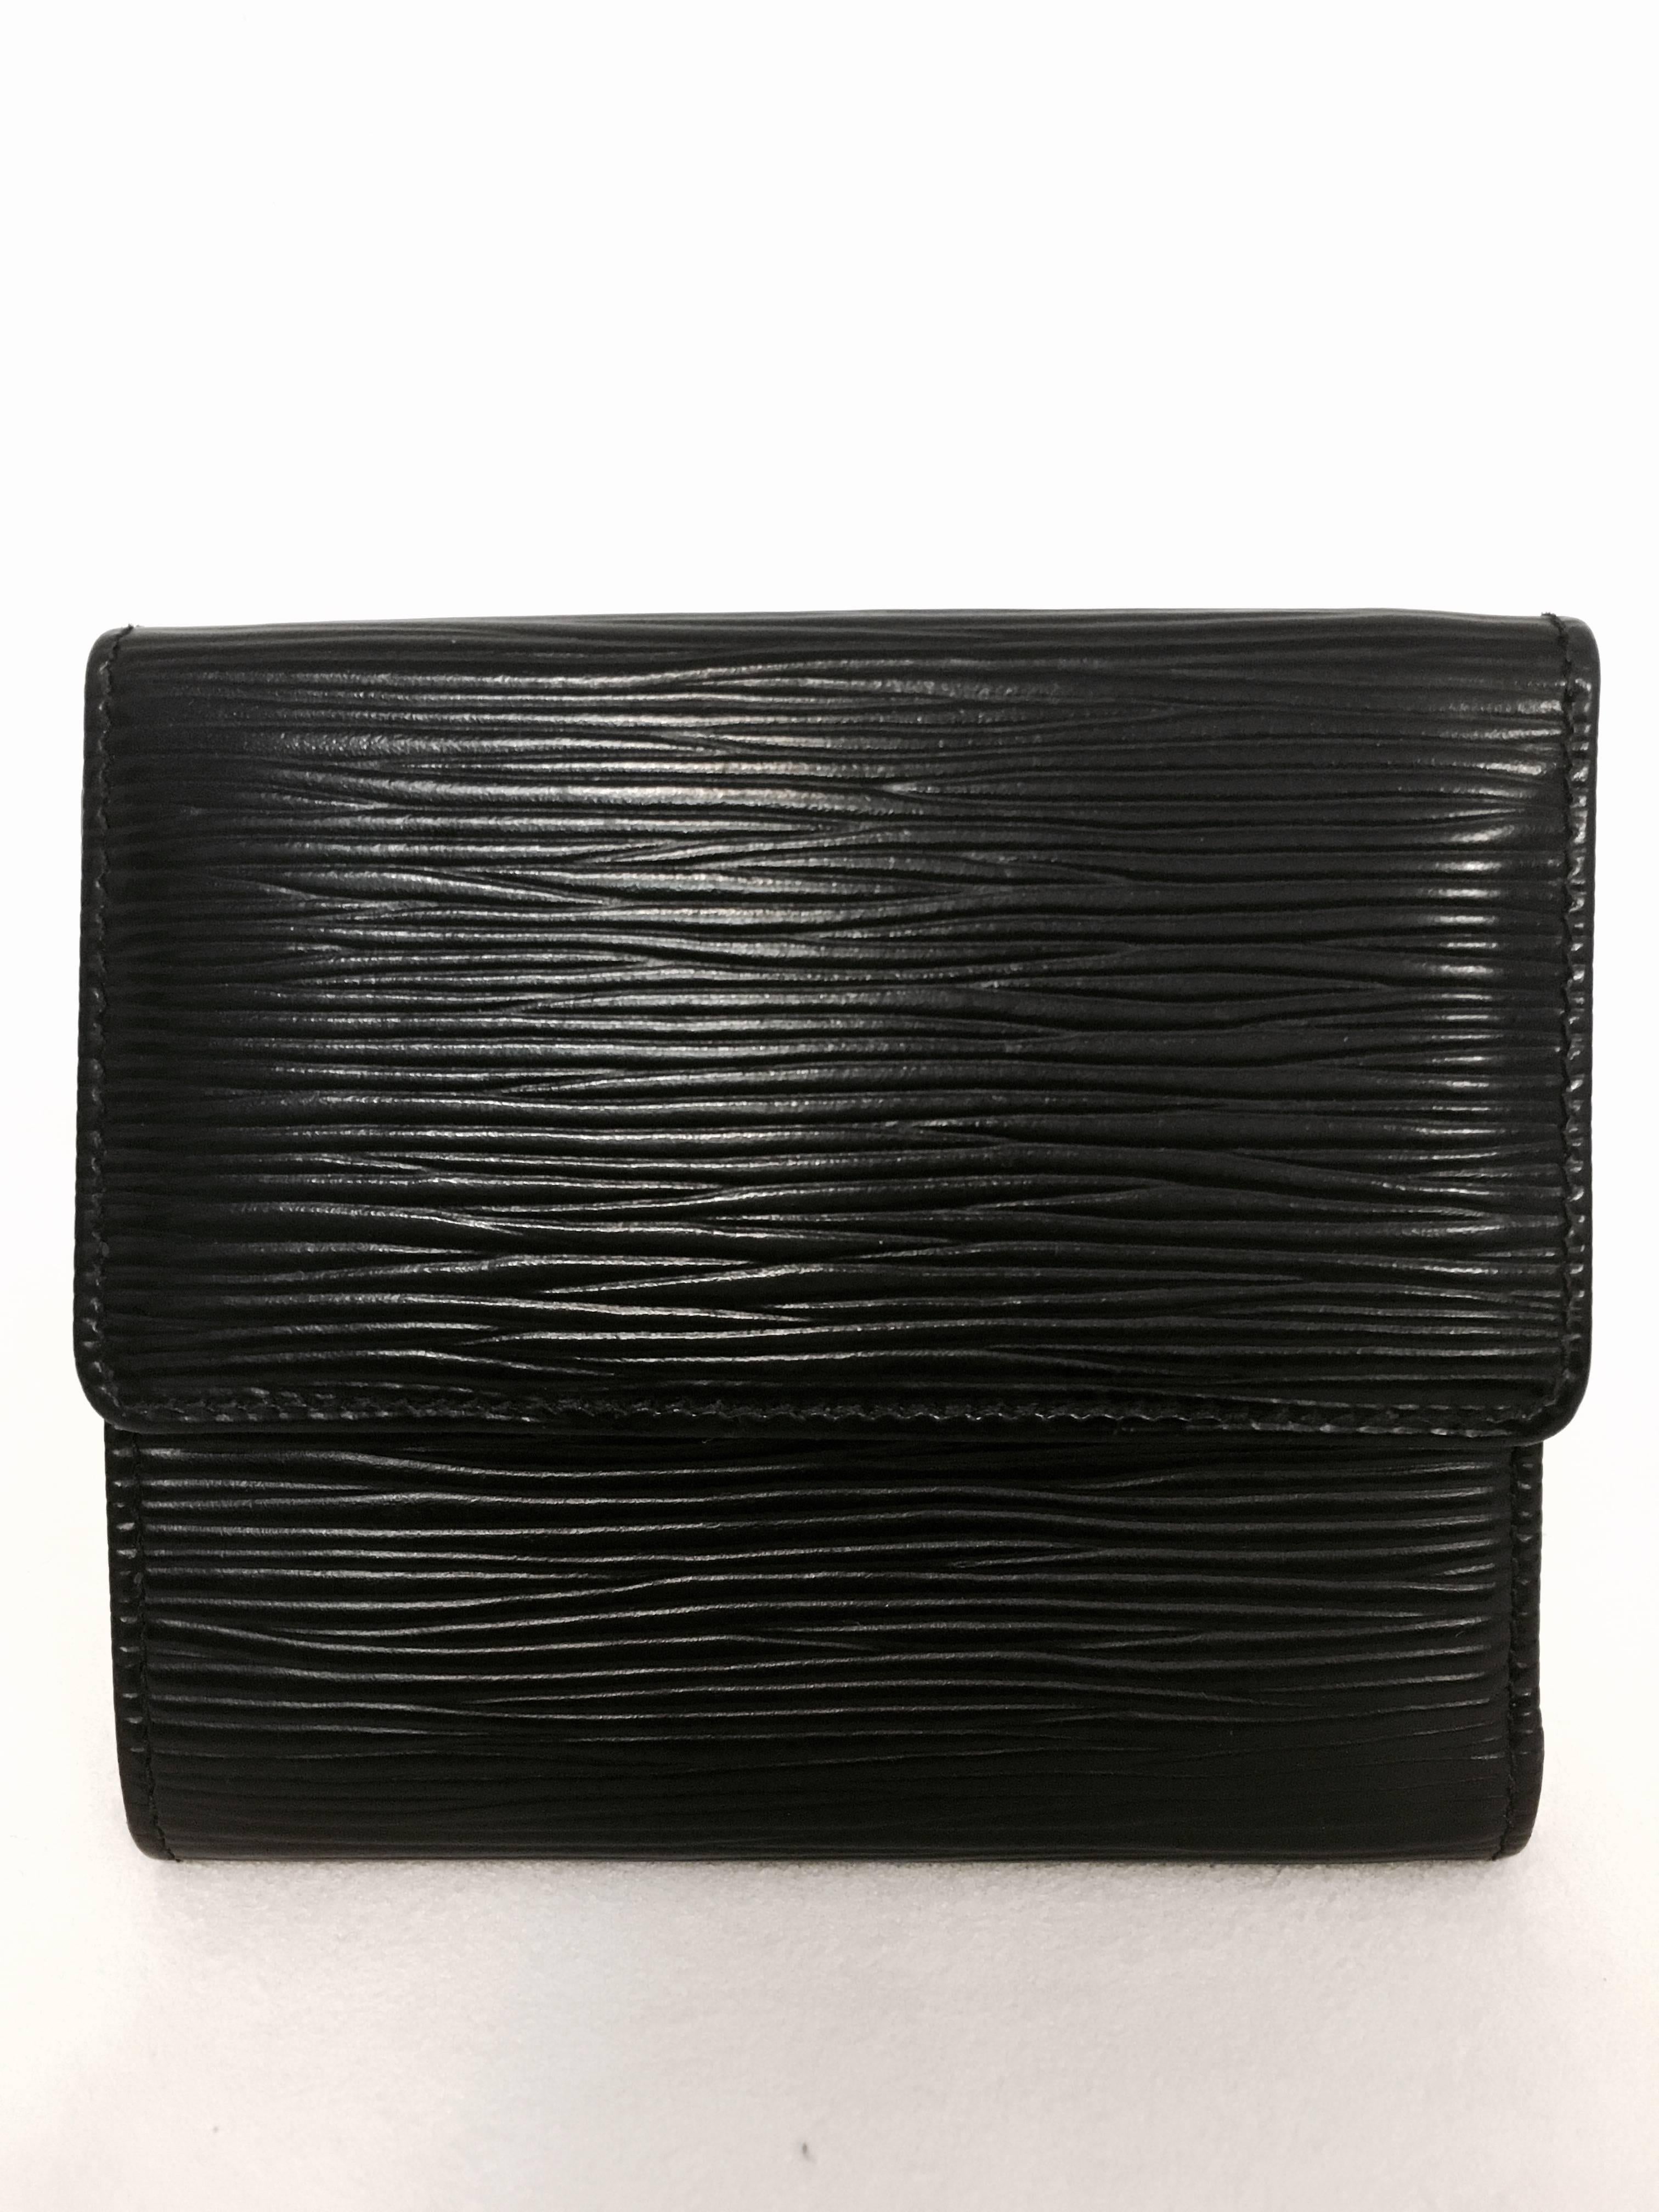 Louis Vuitton Black Epi Leather Elise Wallet is in excellent condition!  Features two main compartments, one dedicated for coins and the other for cards and bills.  4 card slots and two larger slots, a sleeve for bills and an outside space for coins